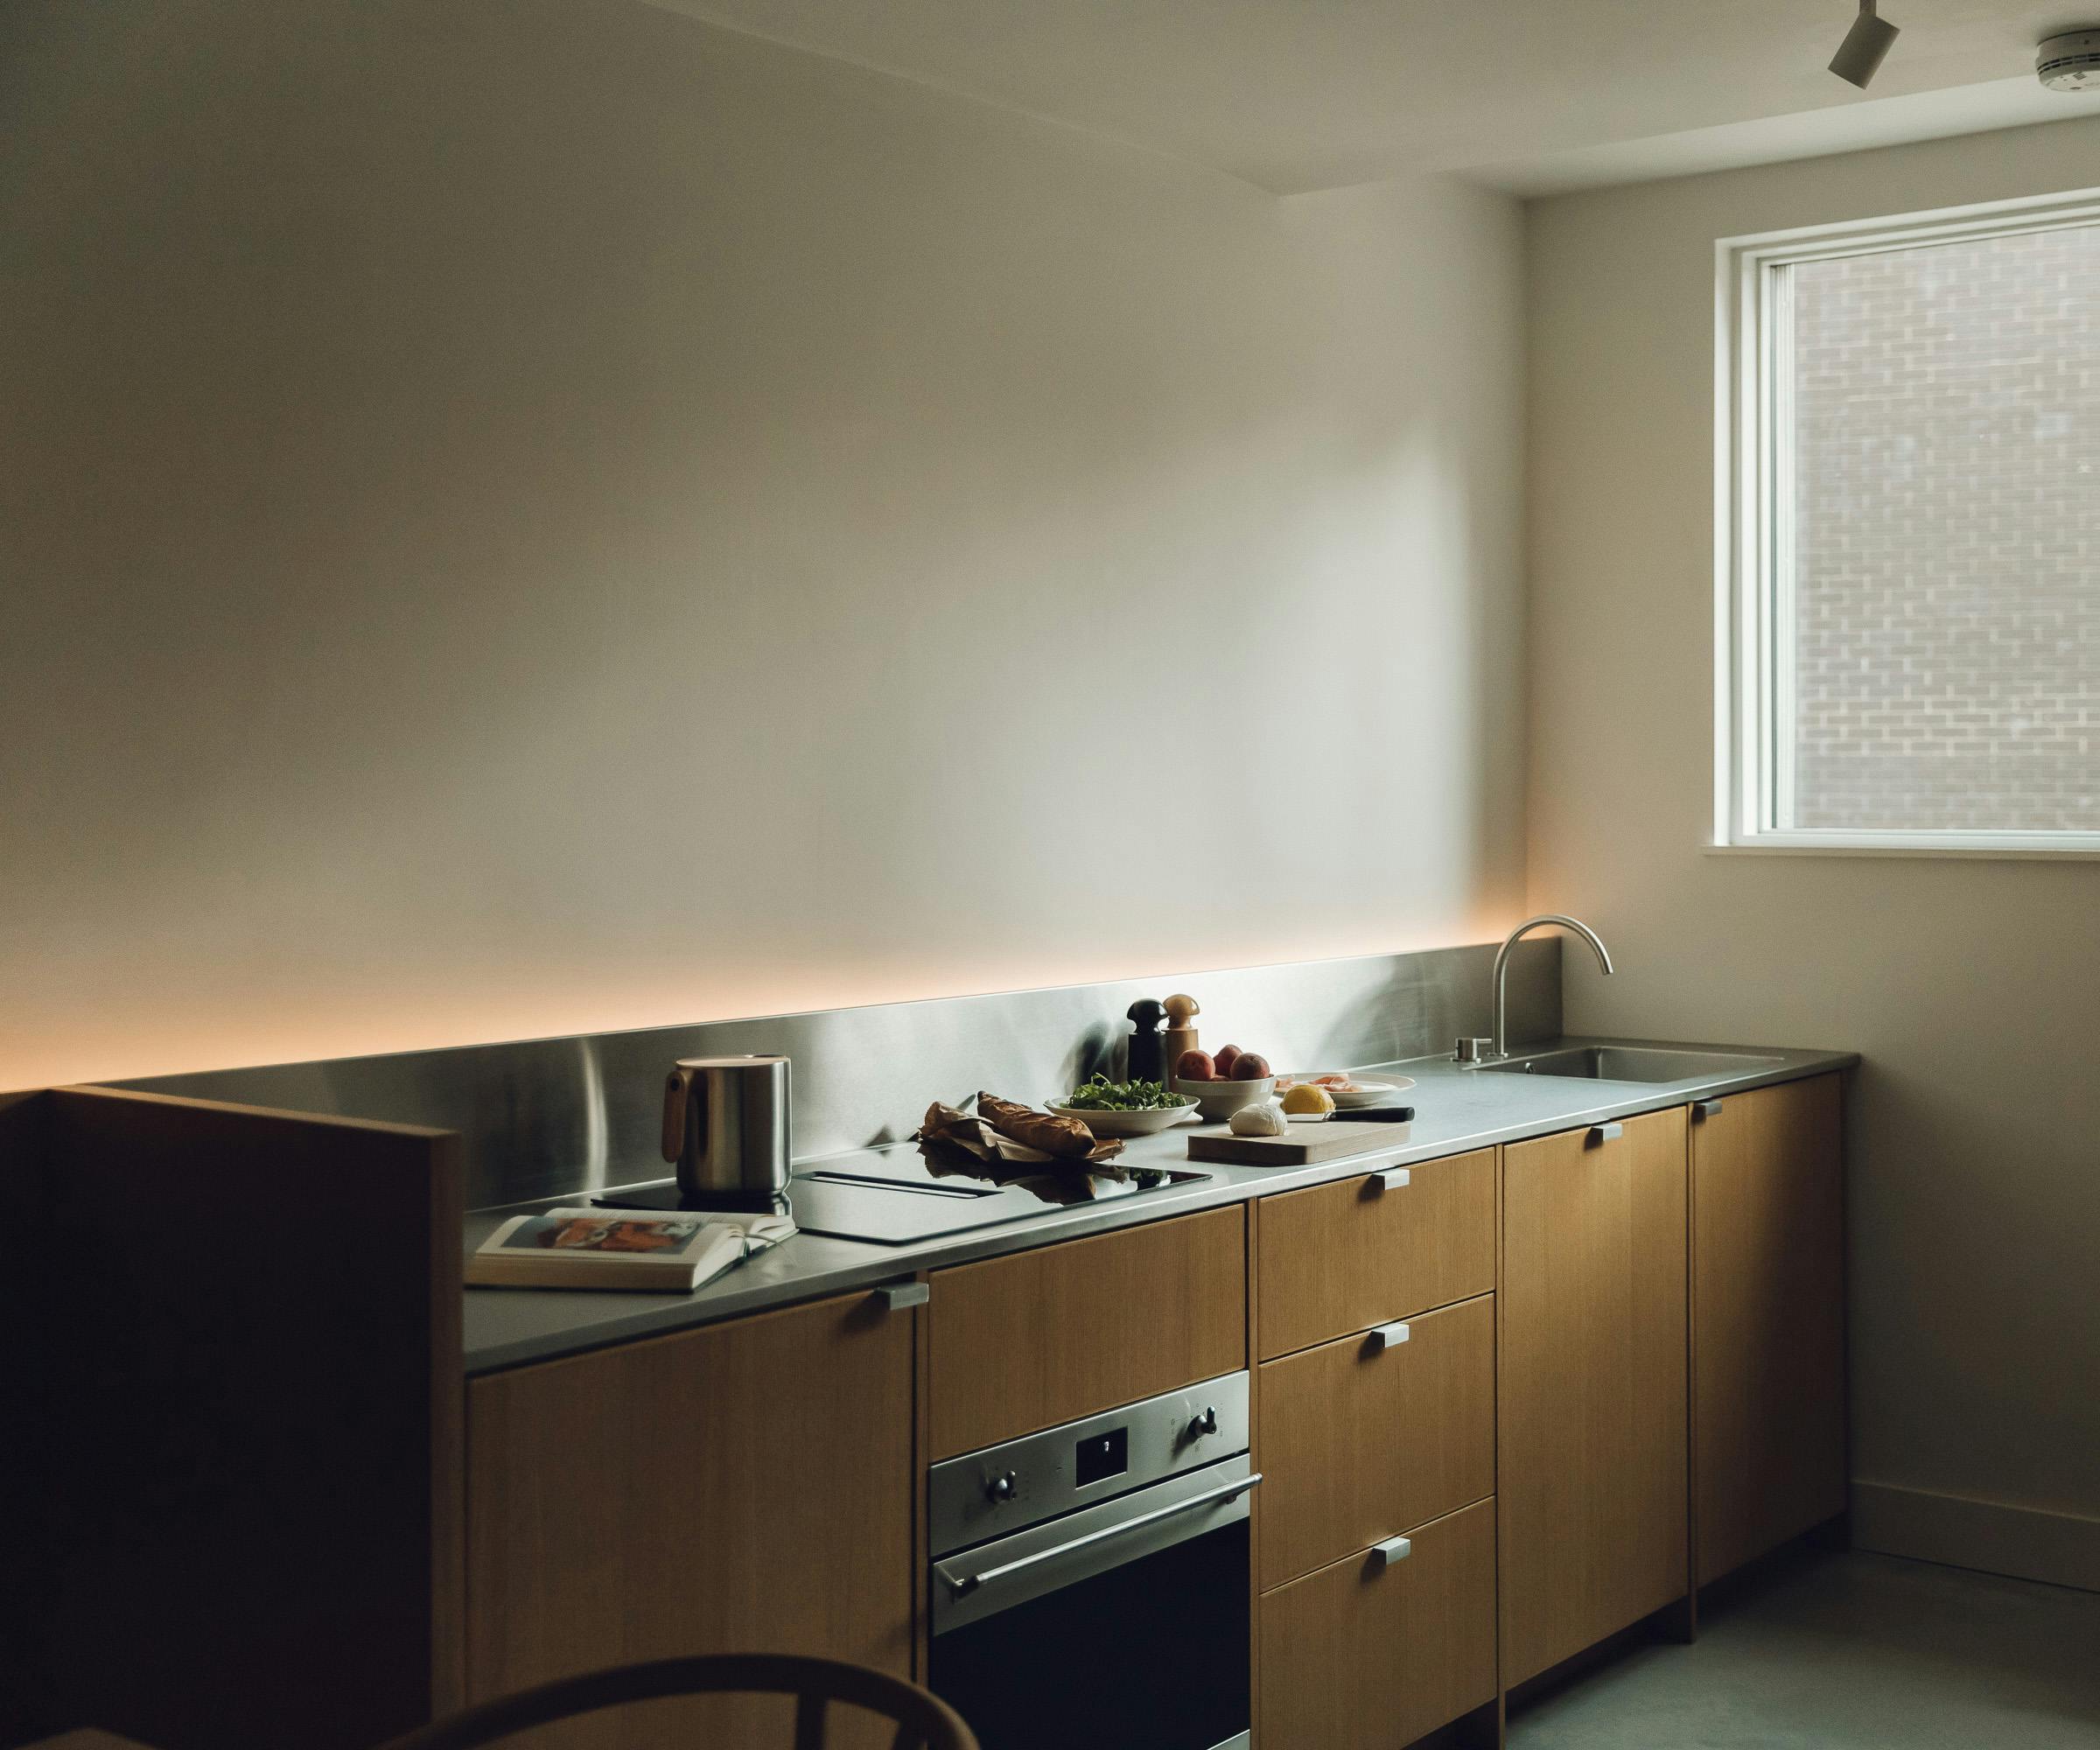 Contemporary wooden and stainless steel Ma-kon kitchen in Kelham Island, Sheffield.